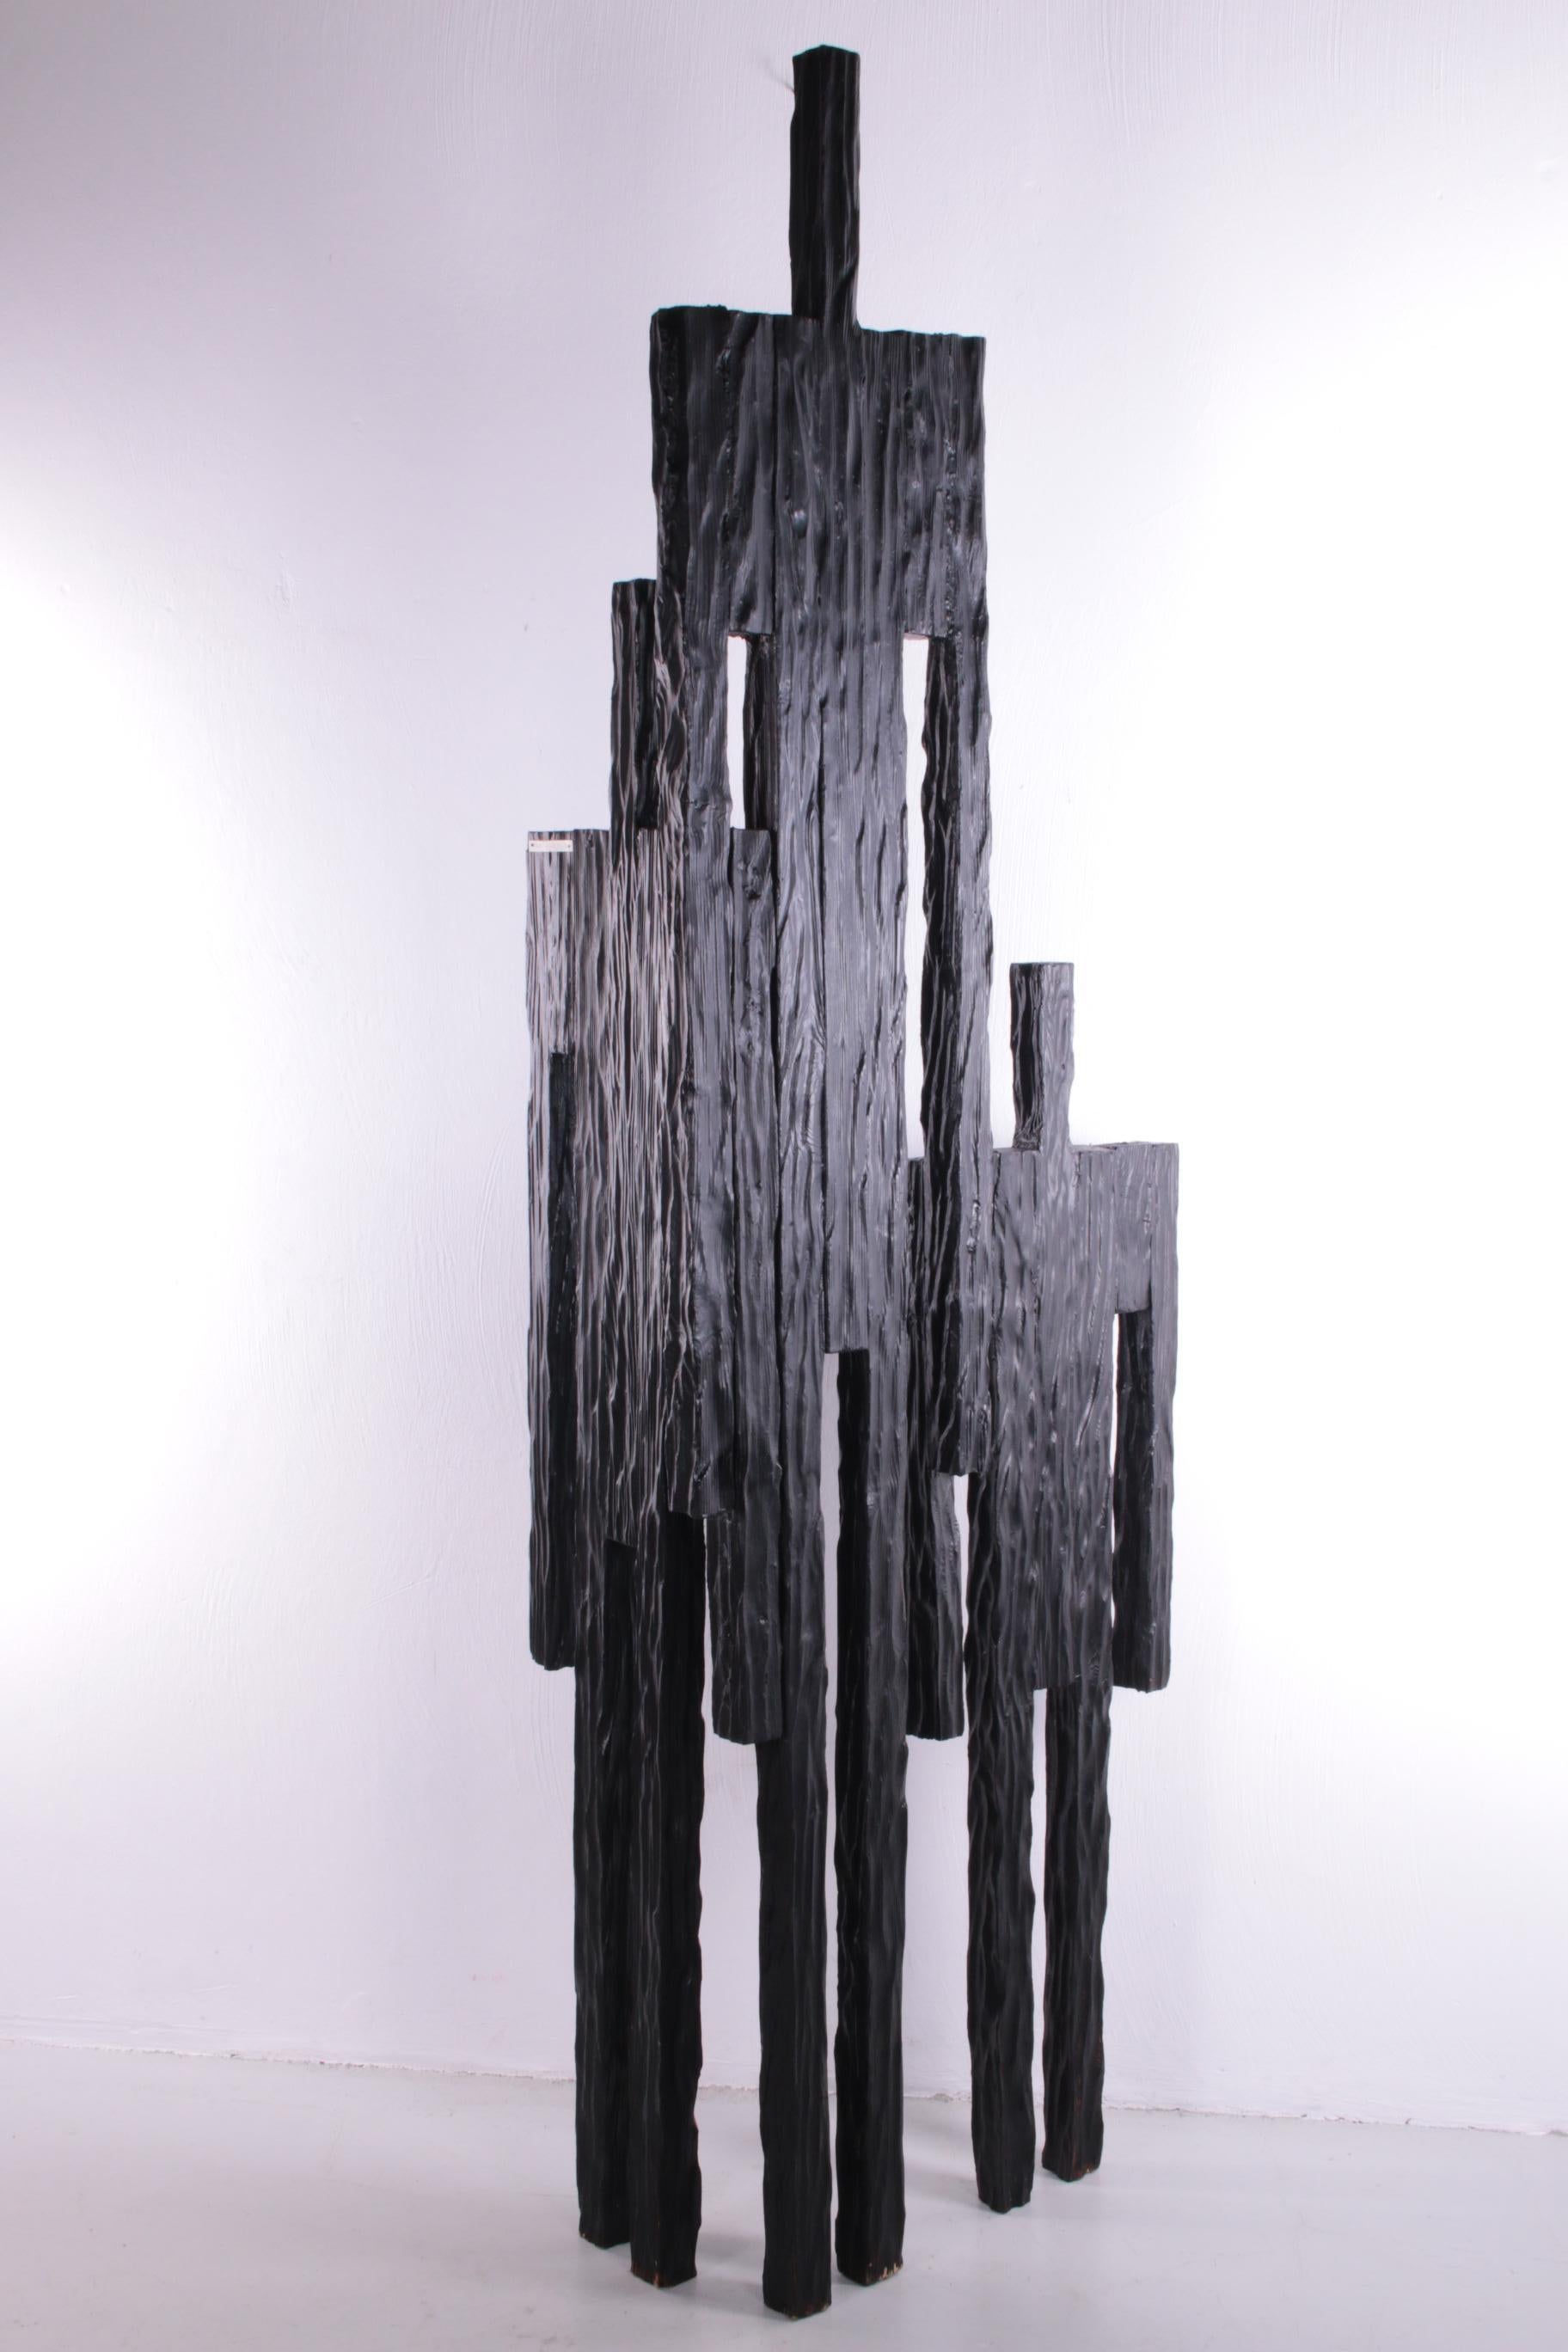 Post-Modern Large Artwork Coat Rack 'Family' by Thierry Jacques